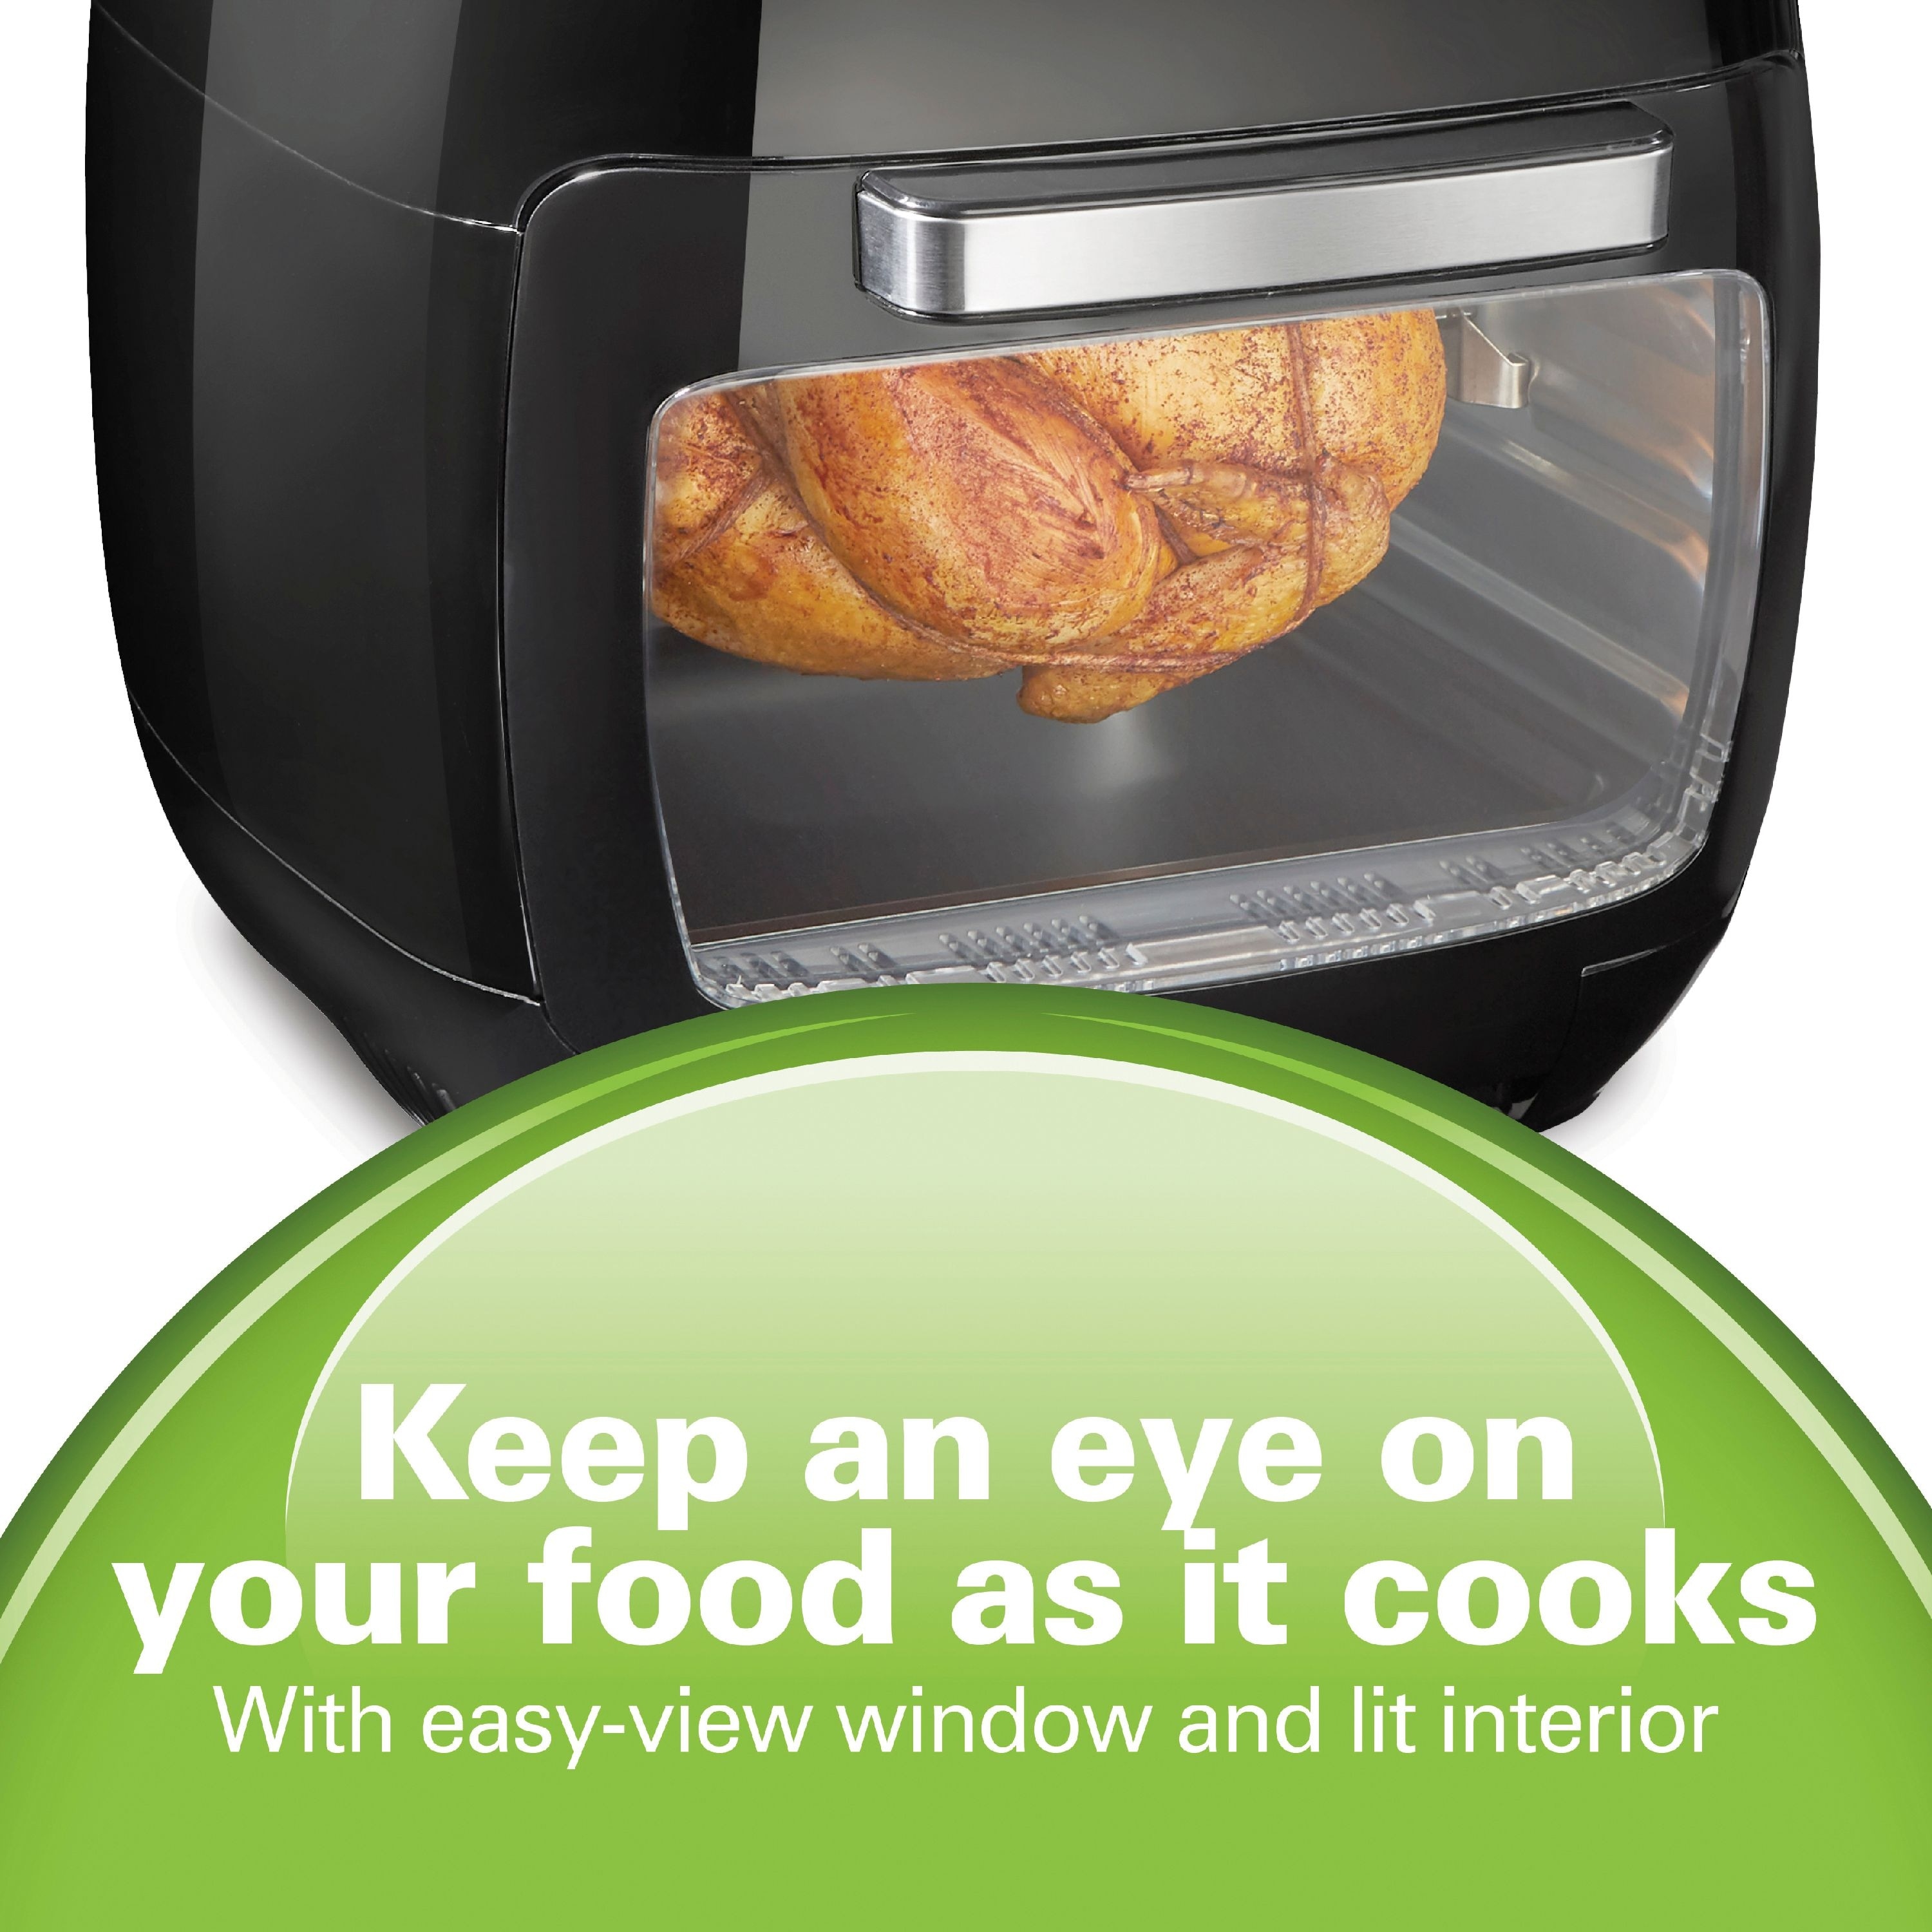 https://ak1.ostkcdn.com/images/products/is/images/direct/712a7fd461de5953201e6ff2a972ee74a6d1e8ff/11-Liter-Air-Fryer-Oven-with-Rotisserie-and-Rotating-Basket.jpg